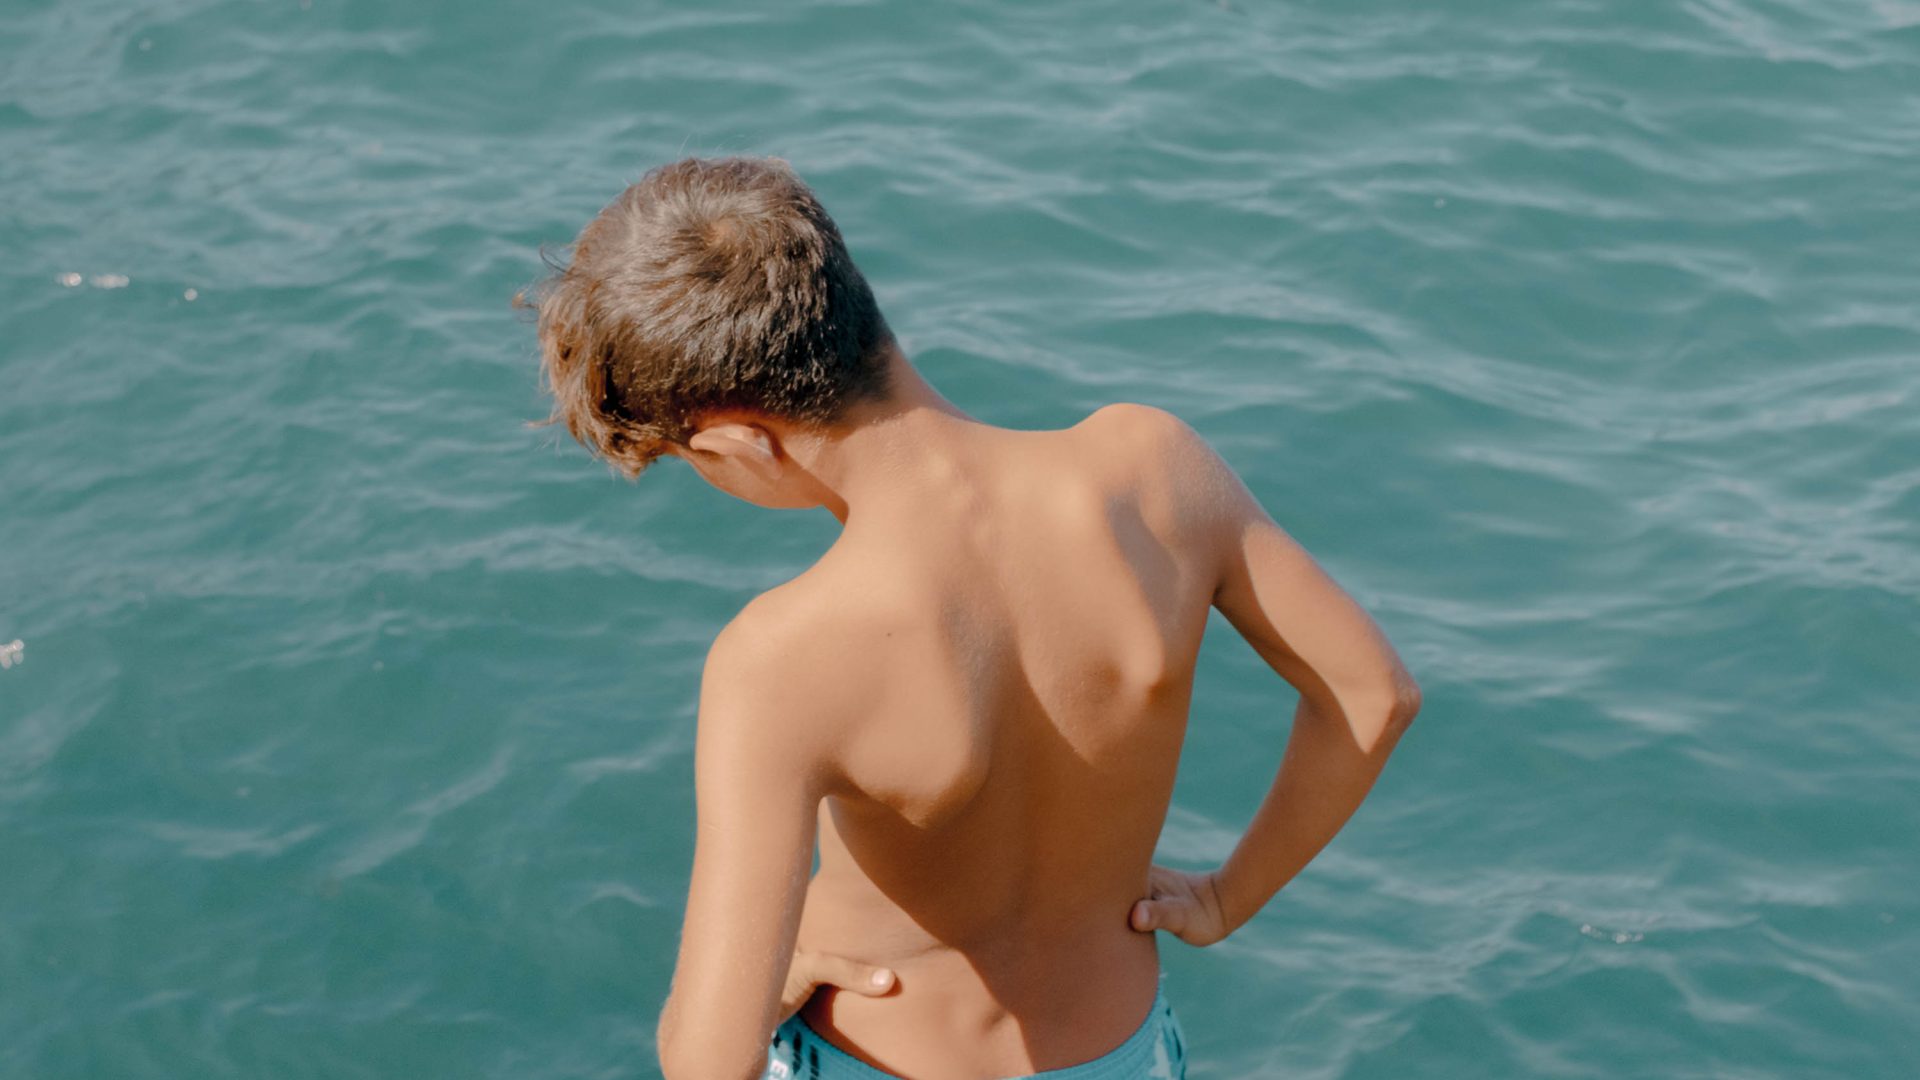 A young boy in blue shorts has his back to the camera. He looks down at the blue water.